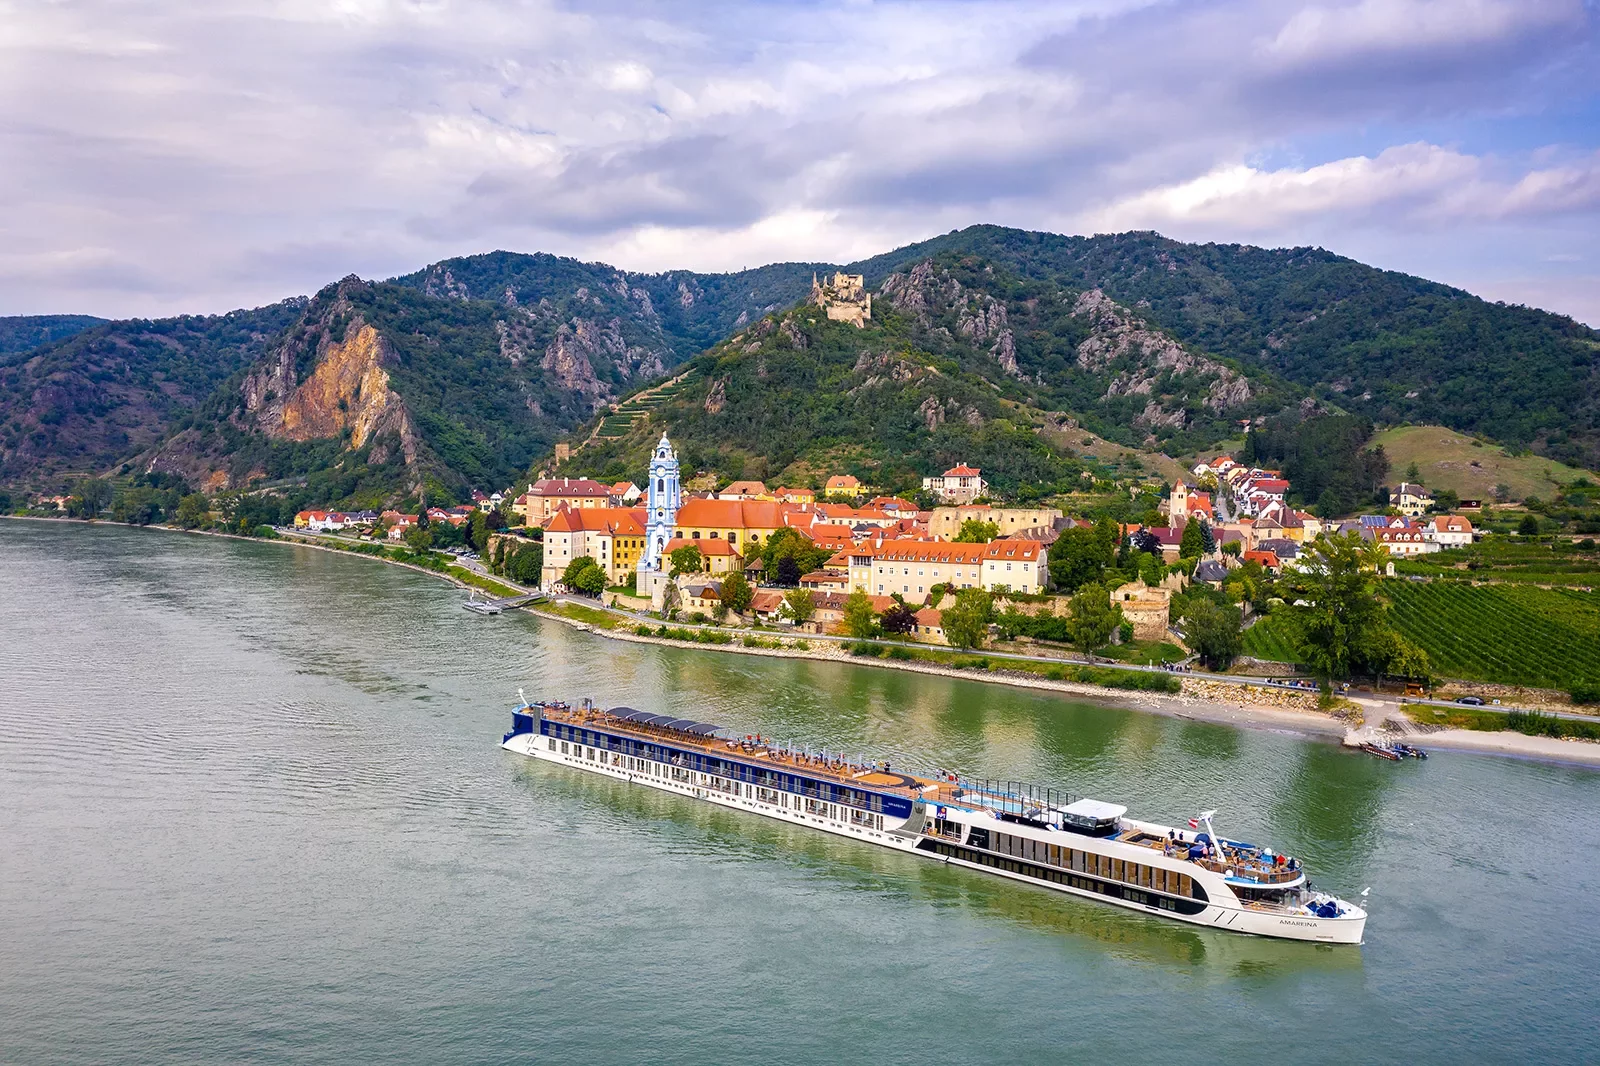 Aerial view of the Amareina cruise ship on the Danube river.